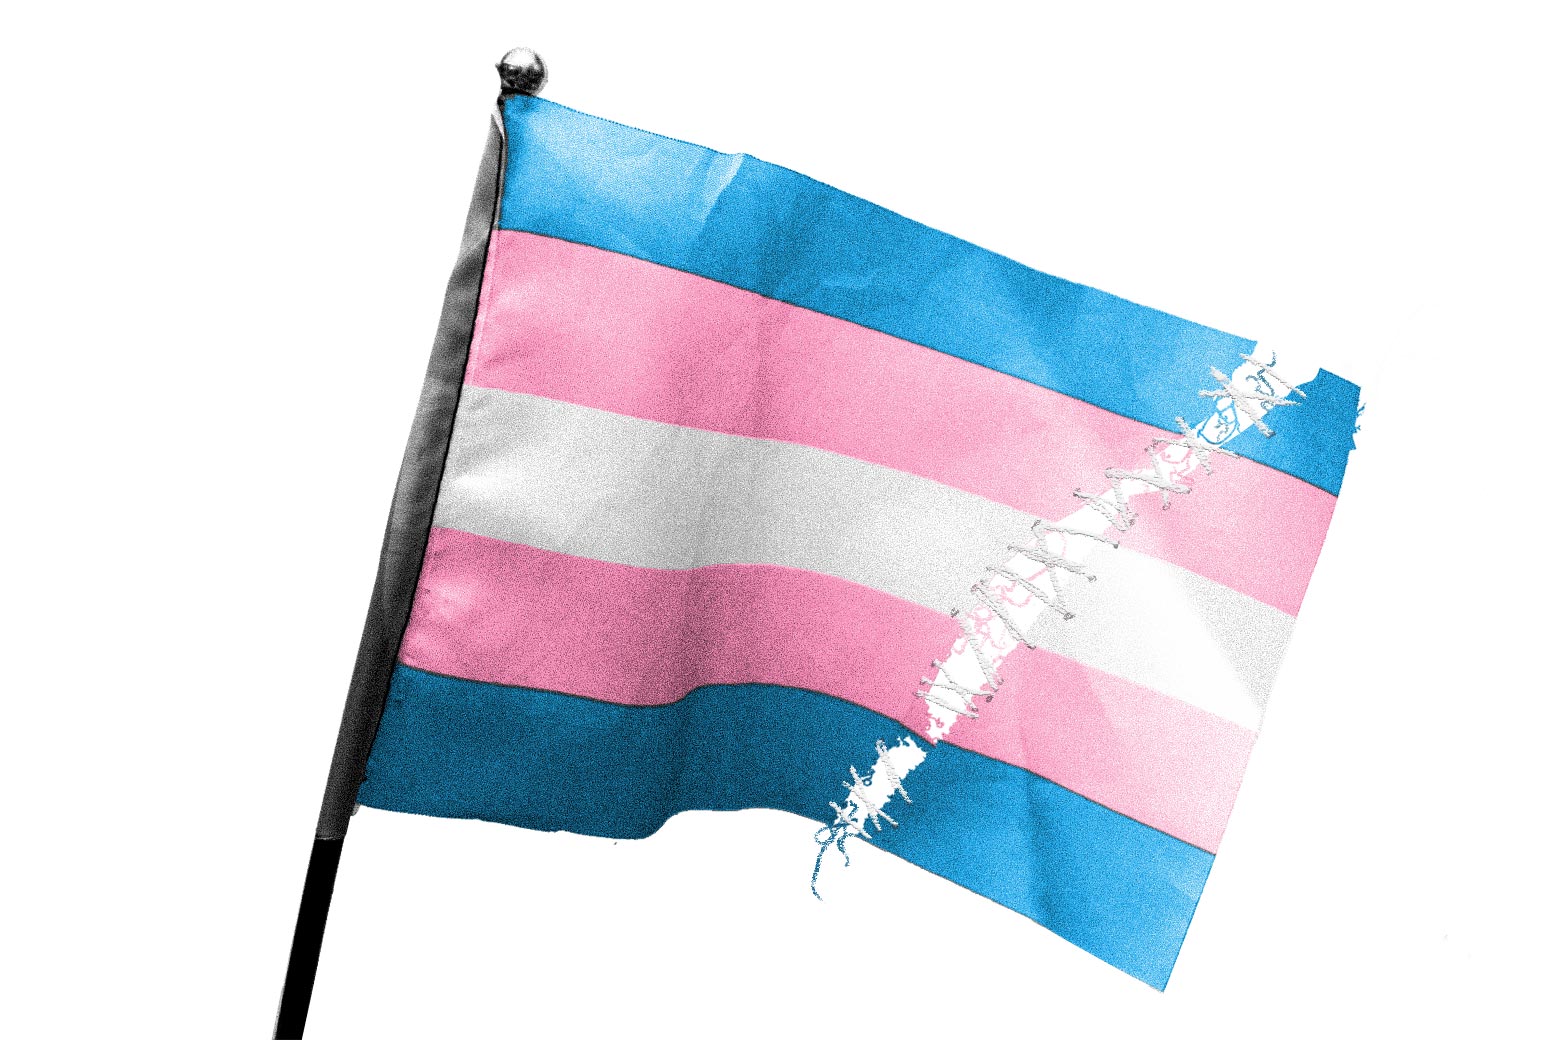 A pro-transgender flag with a tear in it
